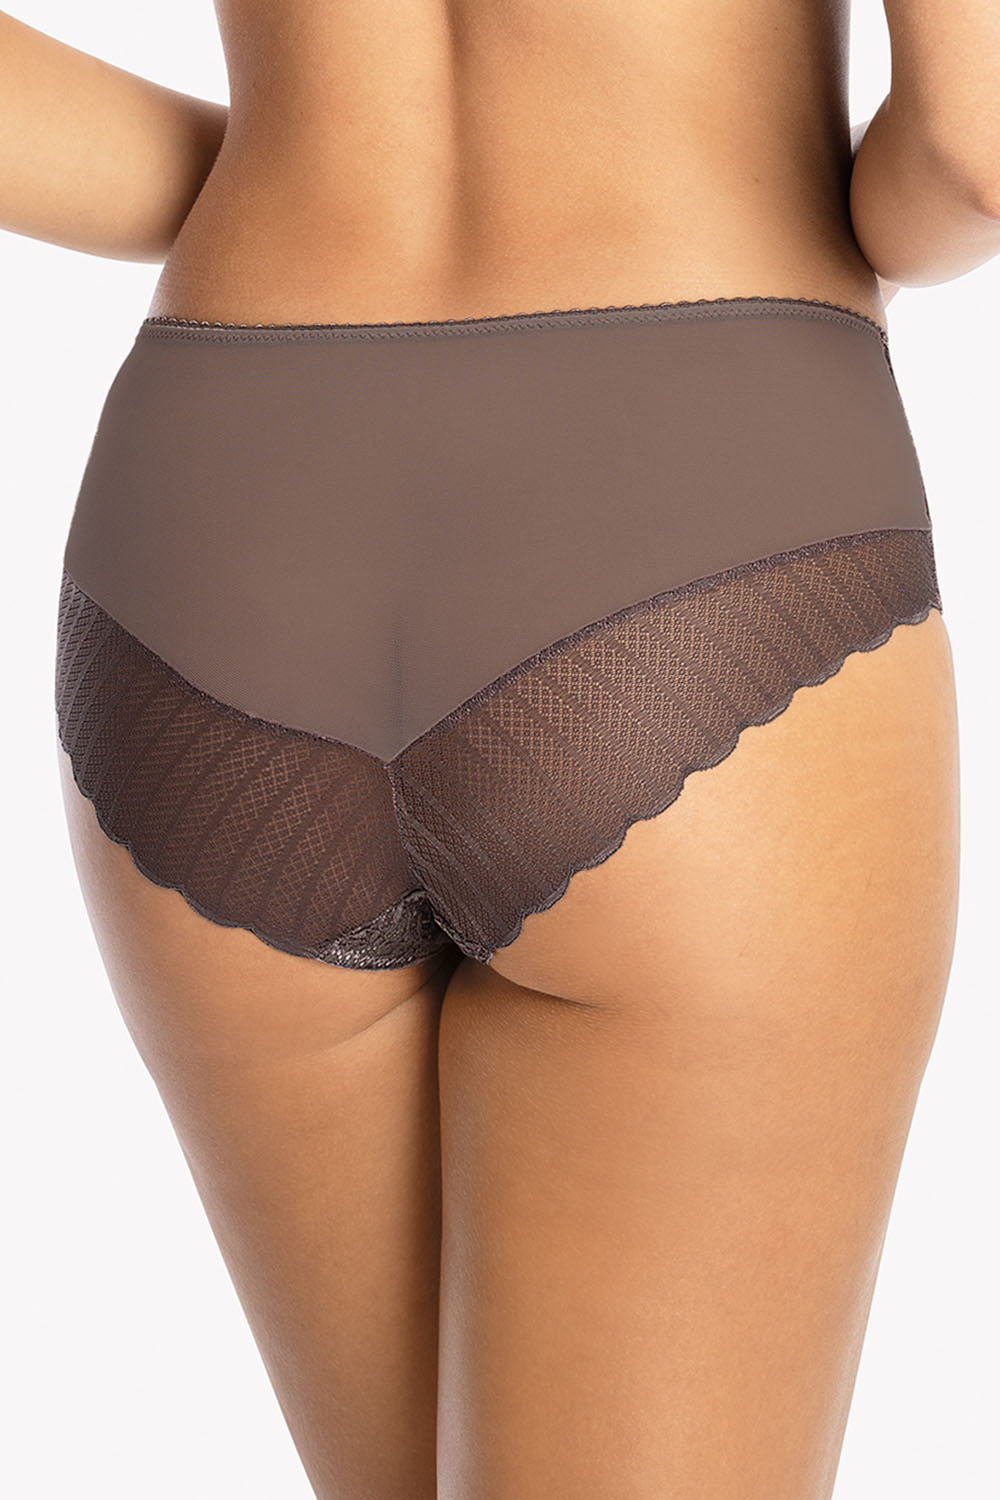 Gaia classic ladies briefs with lace 1122P Zuza, Brown